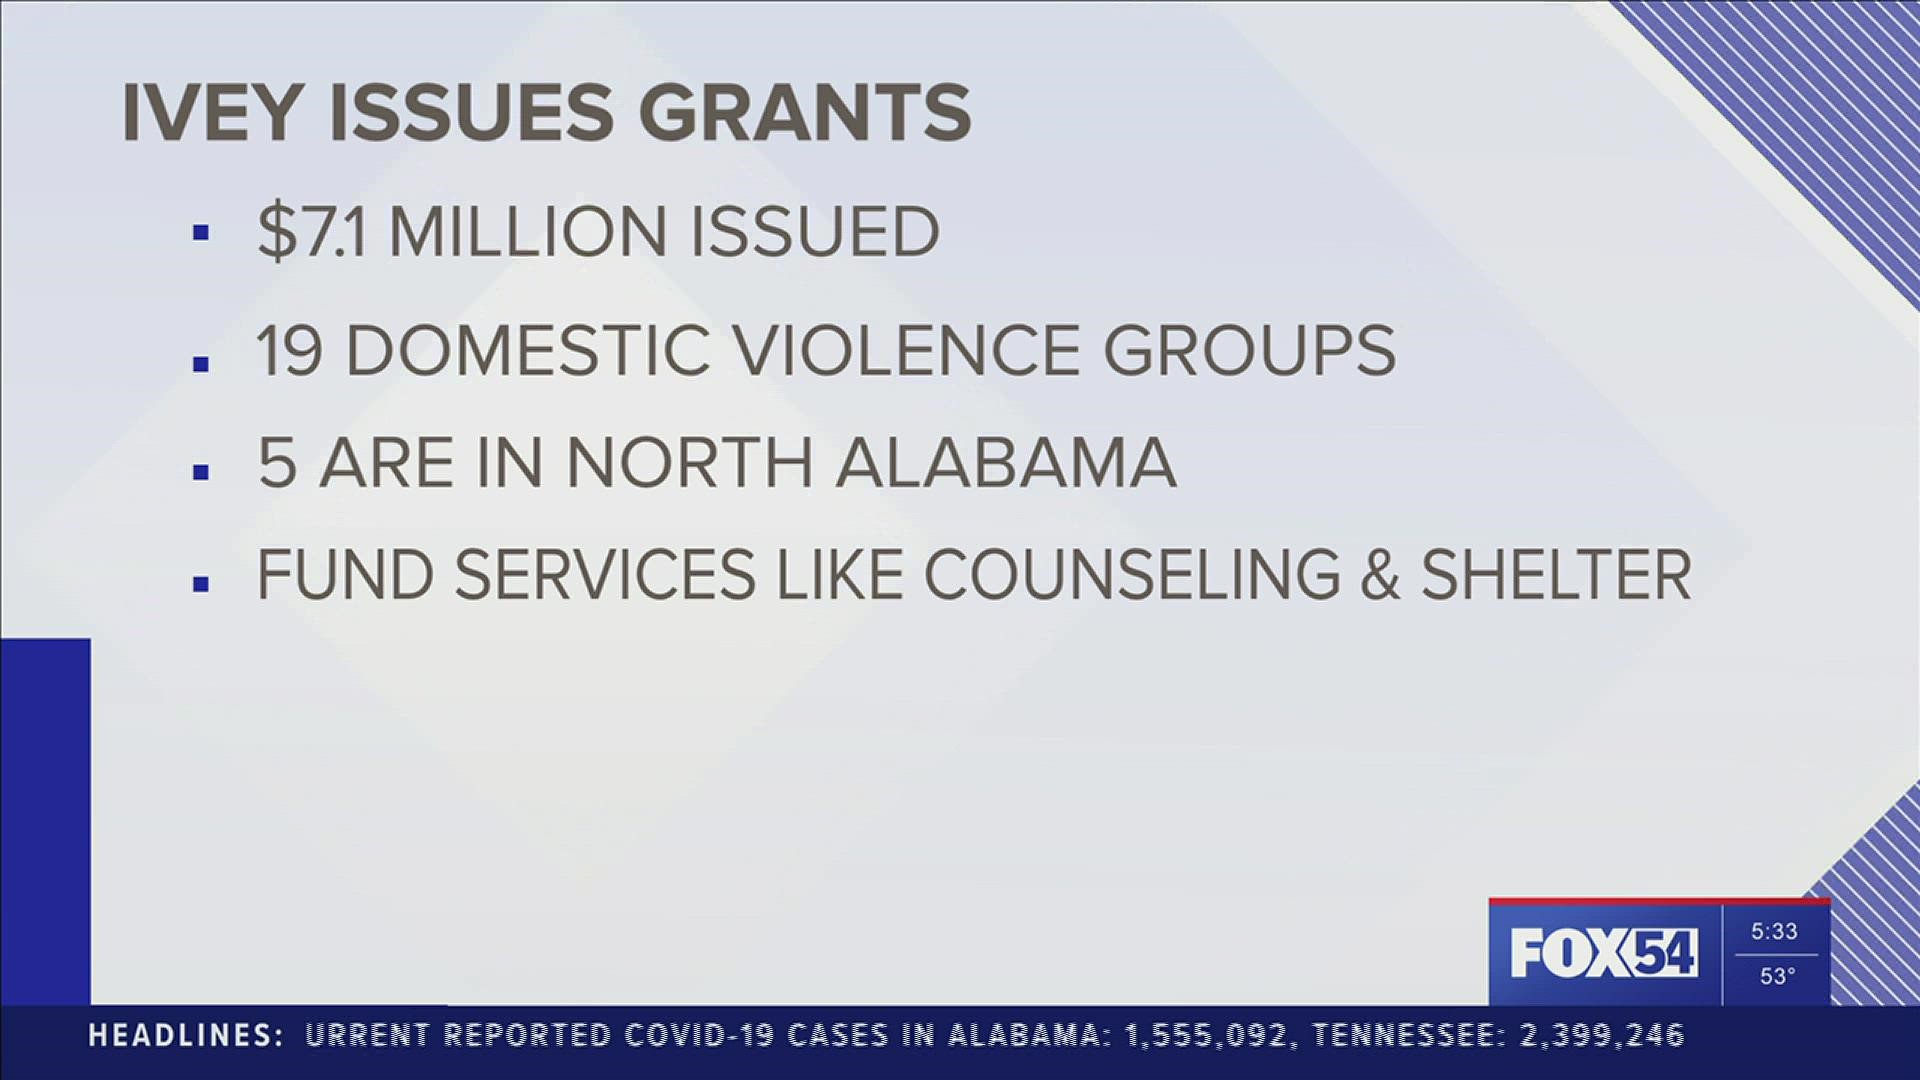 The grants total roughly $7M dollars to 19 organizations across the state. Five of those organizations are in North Alabama.